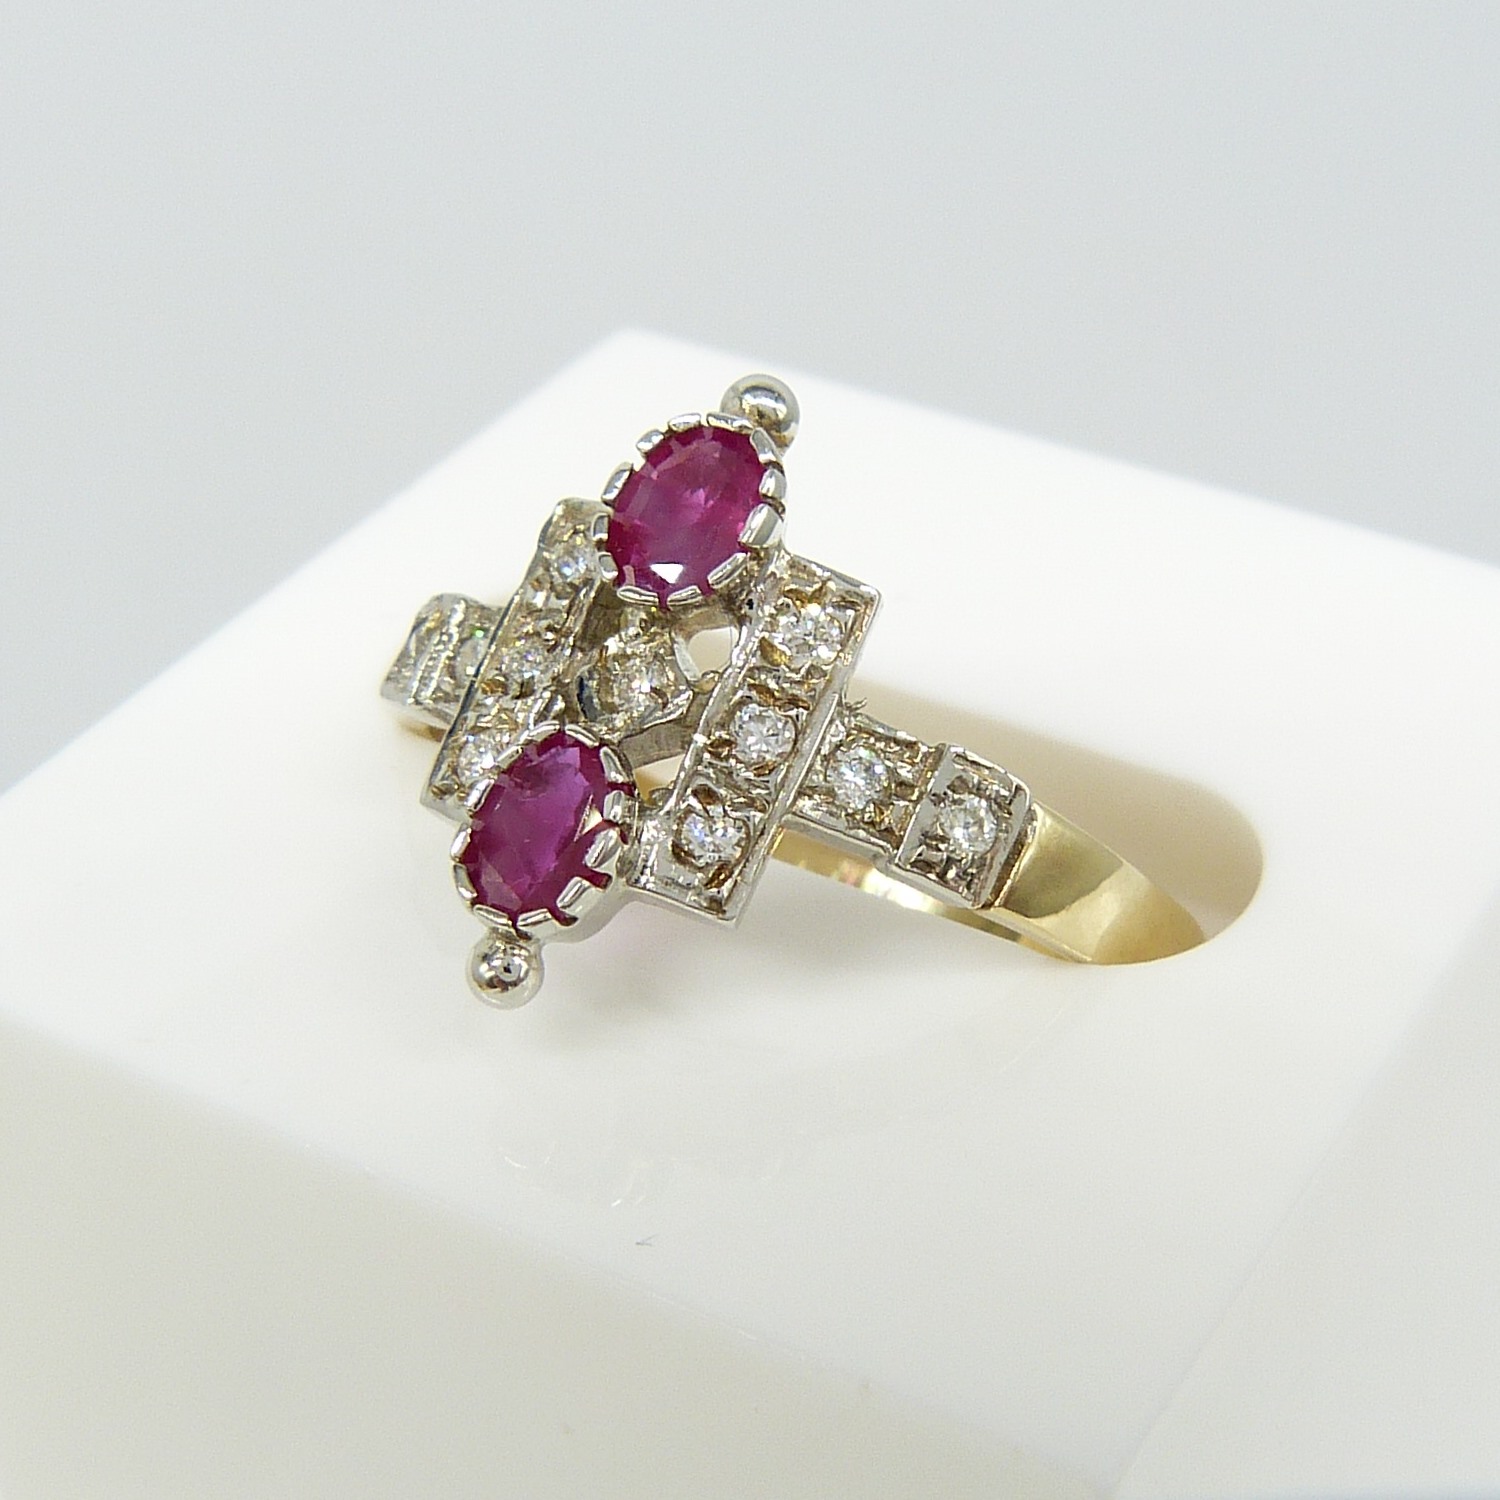 Vintage deco-inspired yellow and white gold ring set with rubies and diamonds - Image 4 of 8